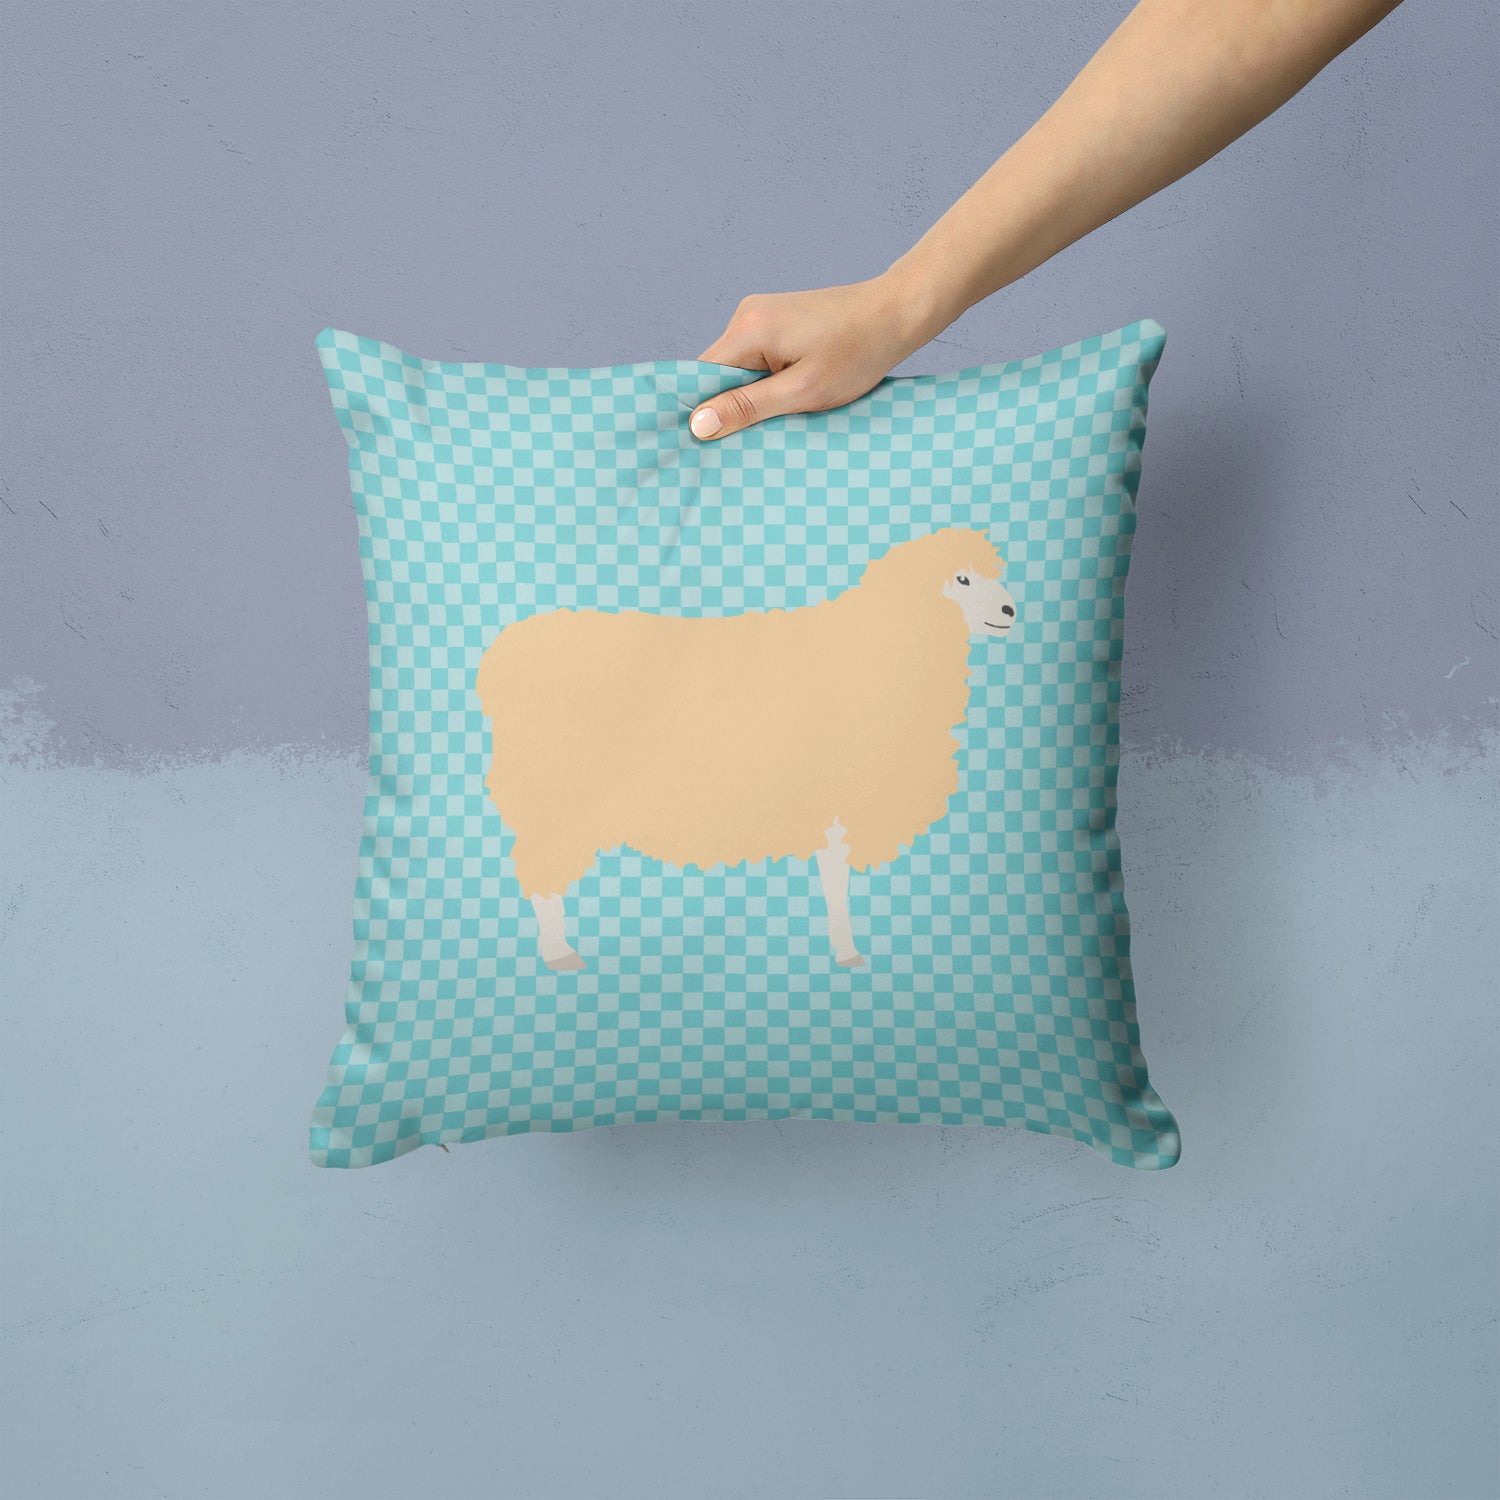 English Leicester Longwool Sheep Blue Check Fabric Decorative Pillow BB8148PW1414 - the-store.com